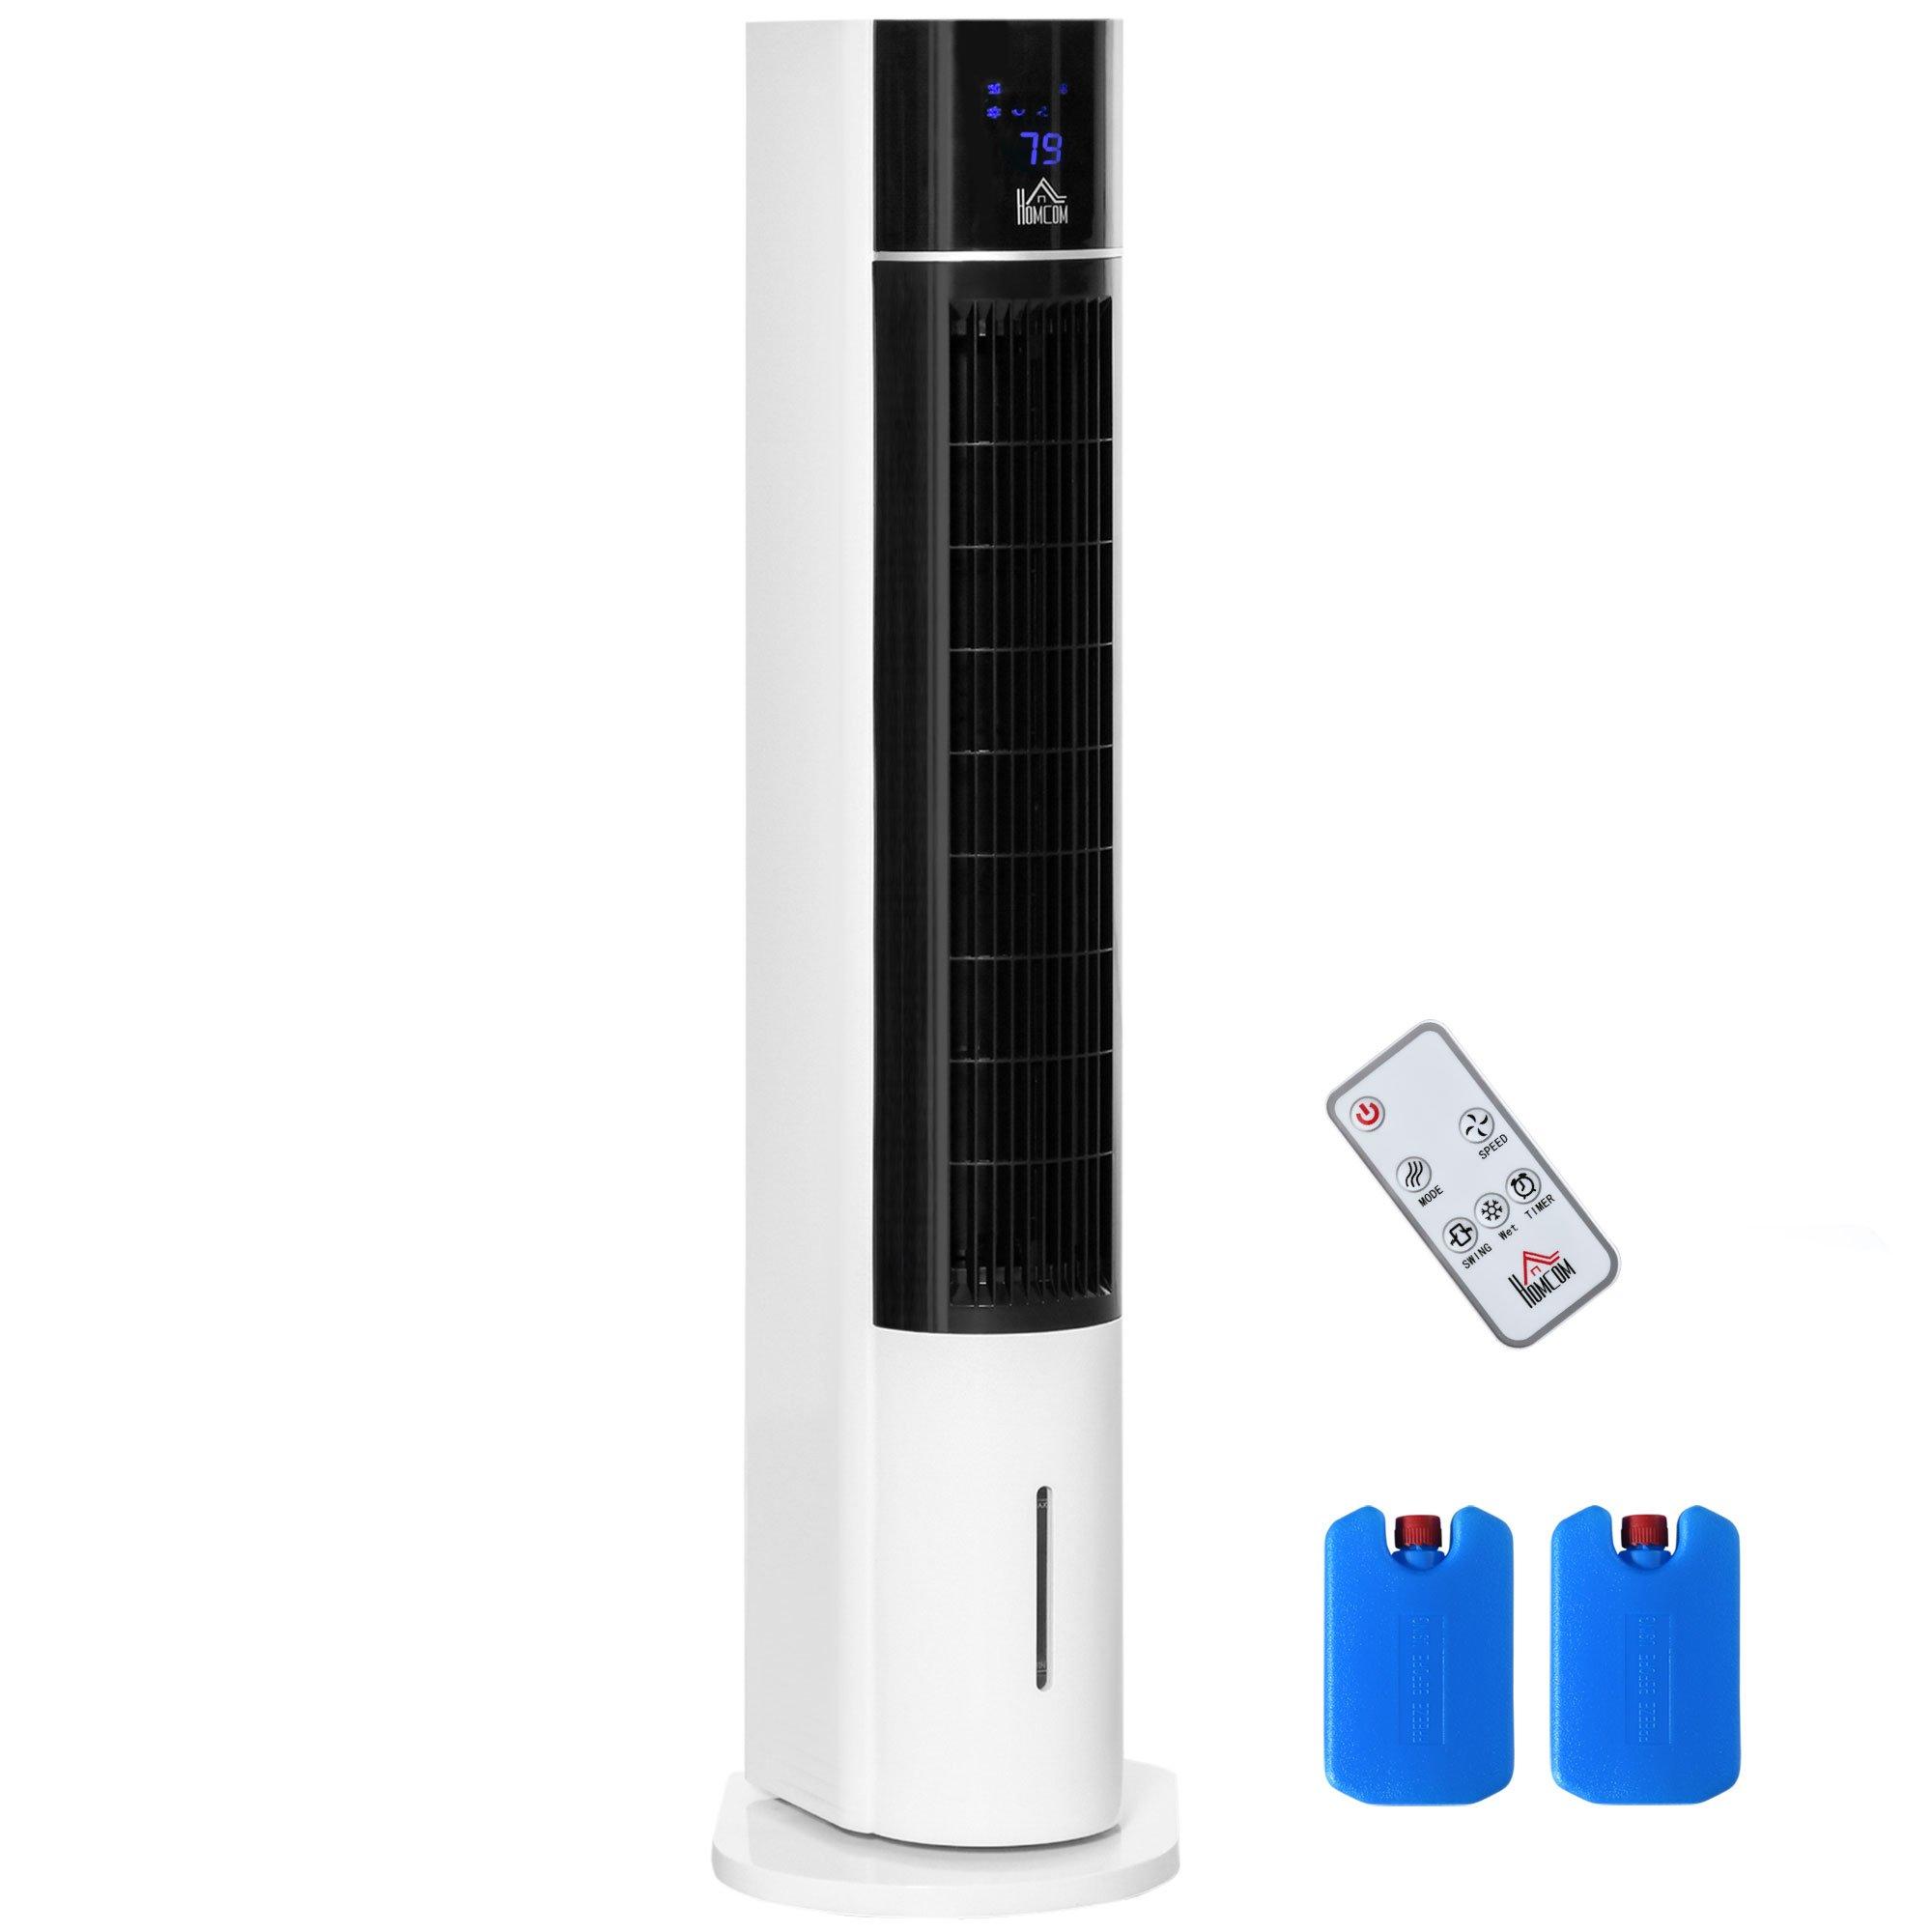 Bladeless Air Cooler Evaporative Tower Fan Humidifier Unit